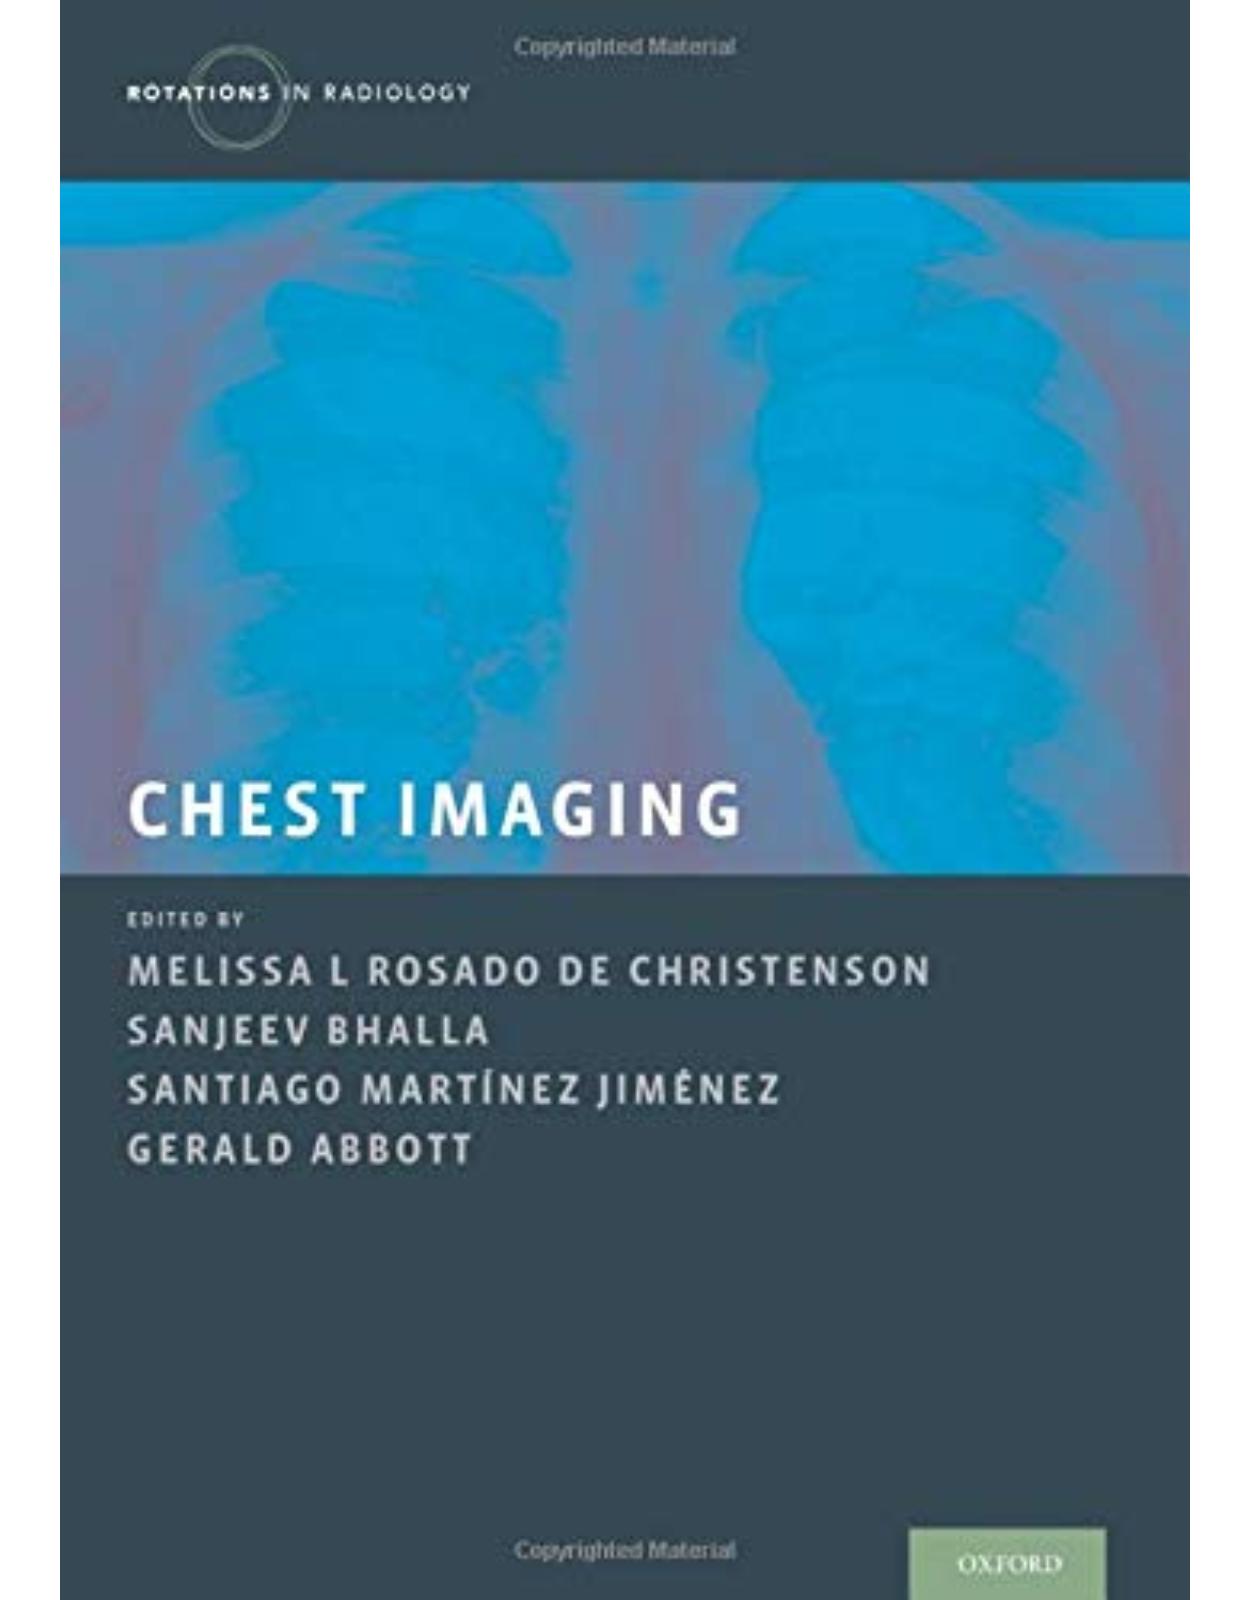 Chest Imaging (Rotations in Radiology) 